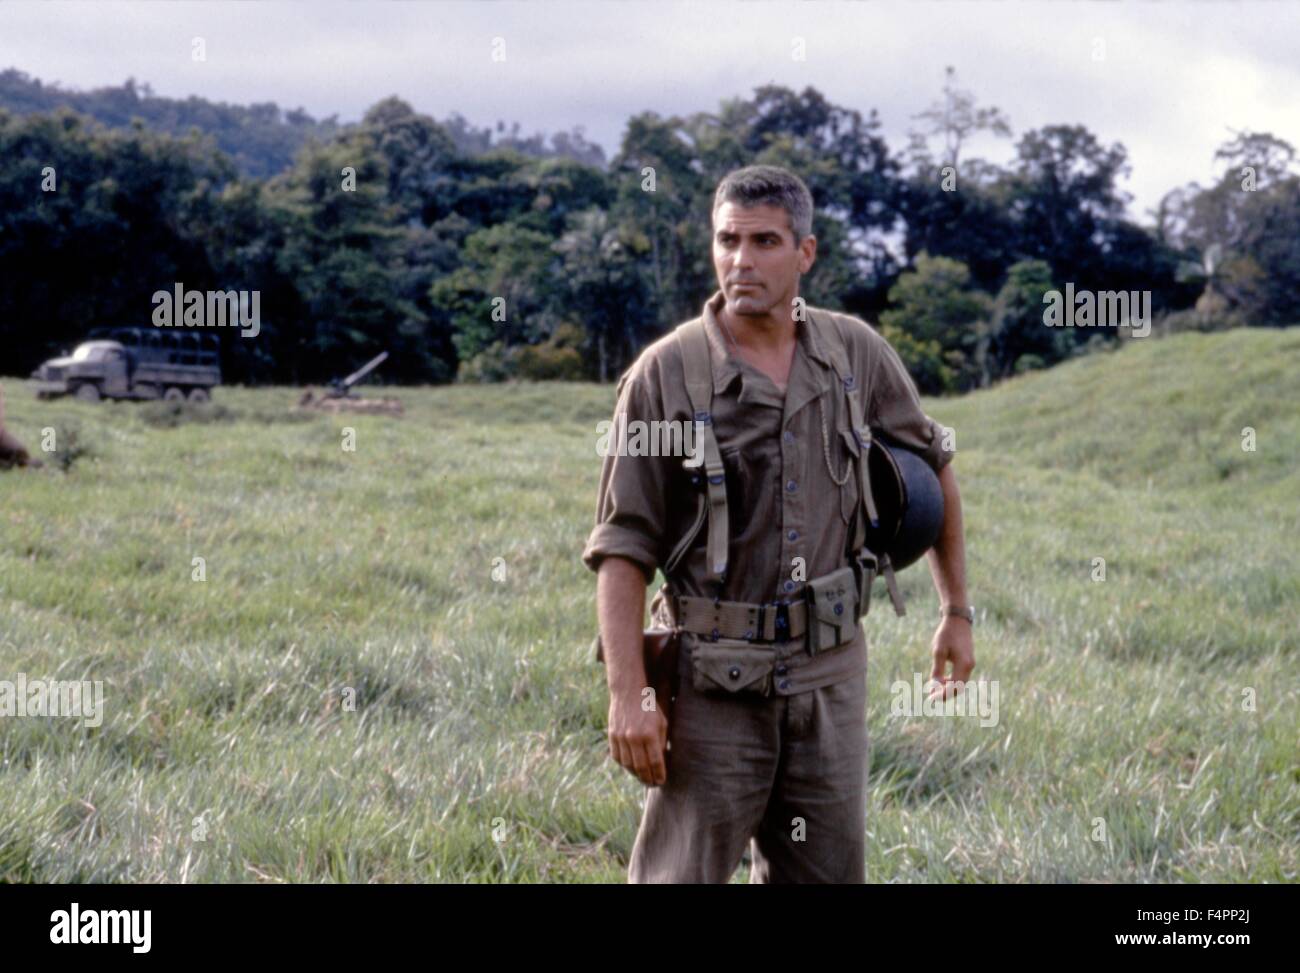 George Clooney / The Thin Red Line / 1998 directed by Terrence Malick  [Twentieth Century Fox Film Corpo] Stock Photo